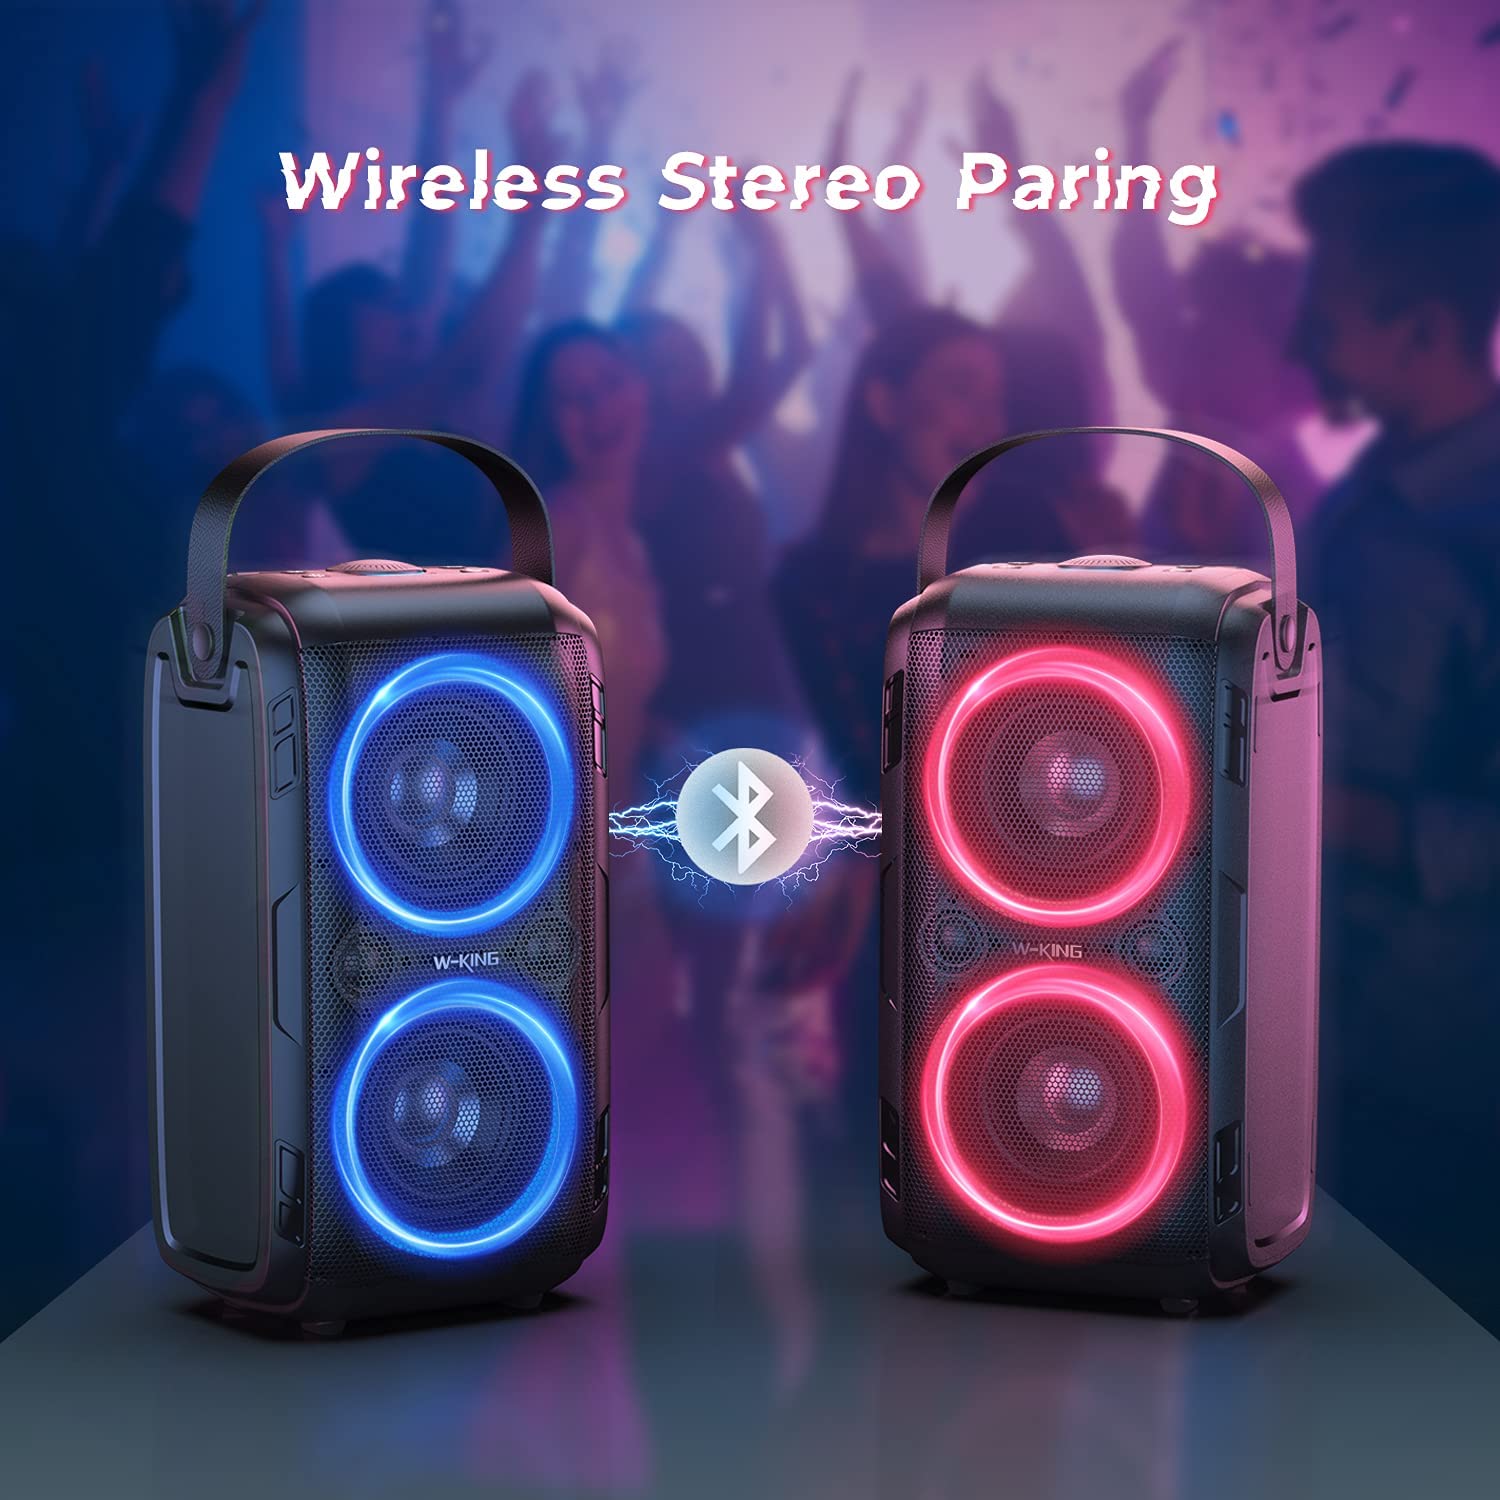 W-KING 80W Super Punchy Bass Portable Wireless Speakers | T9